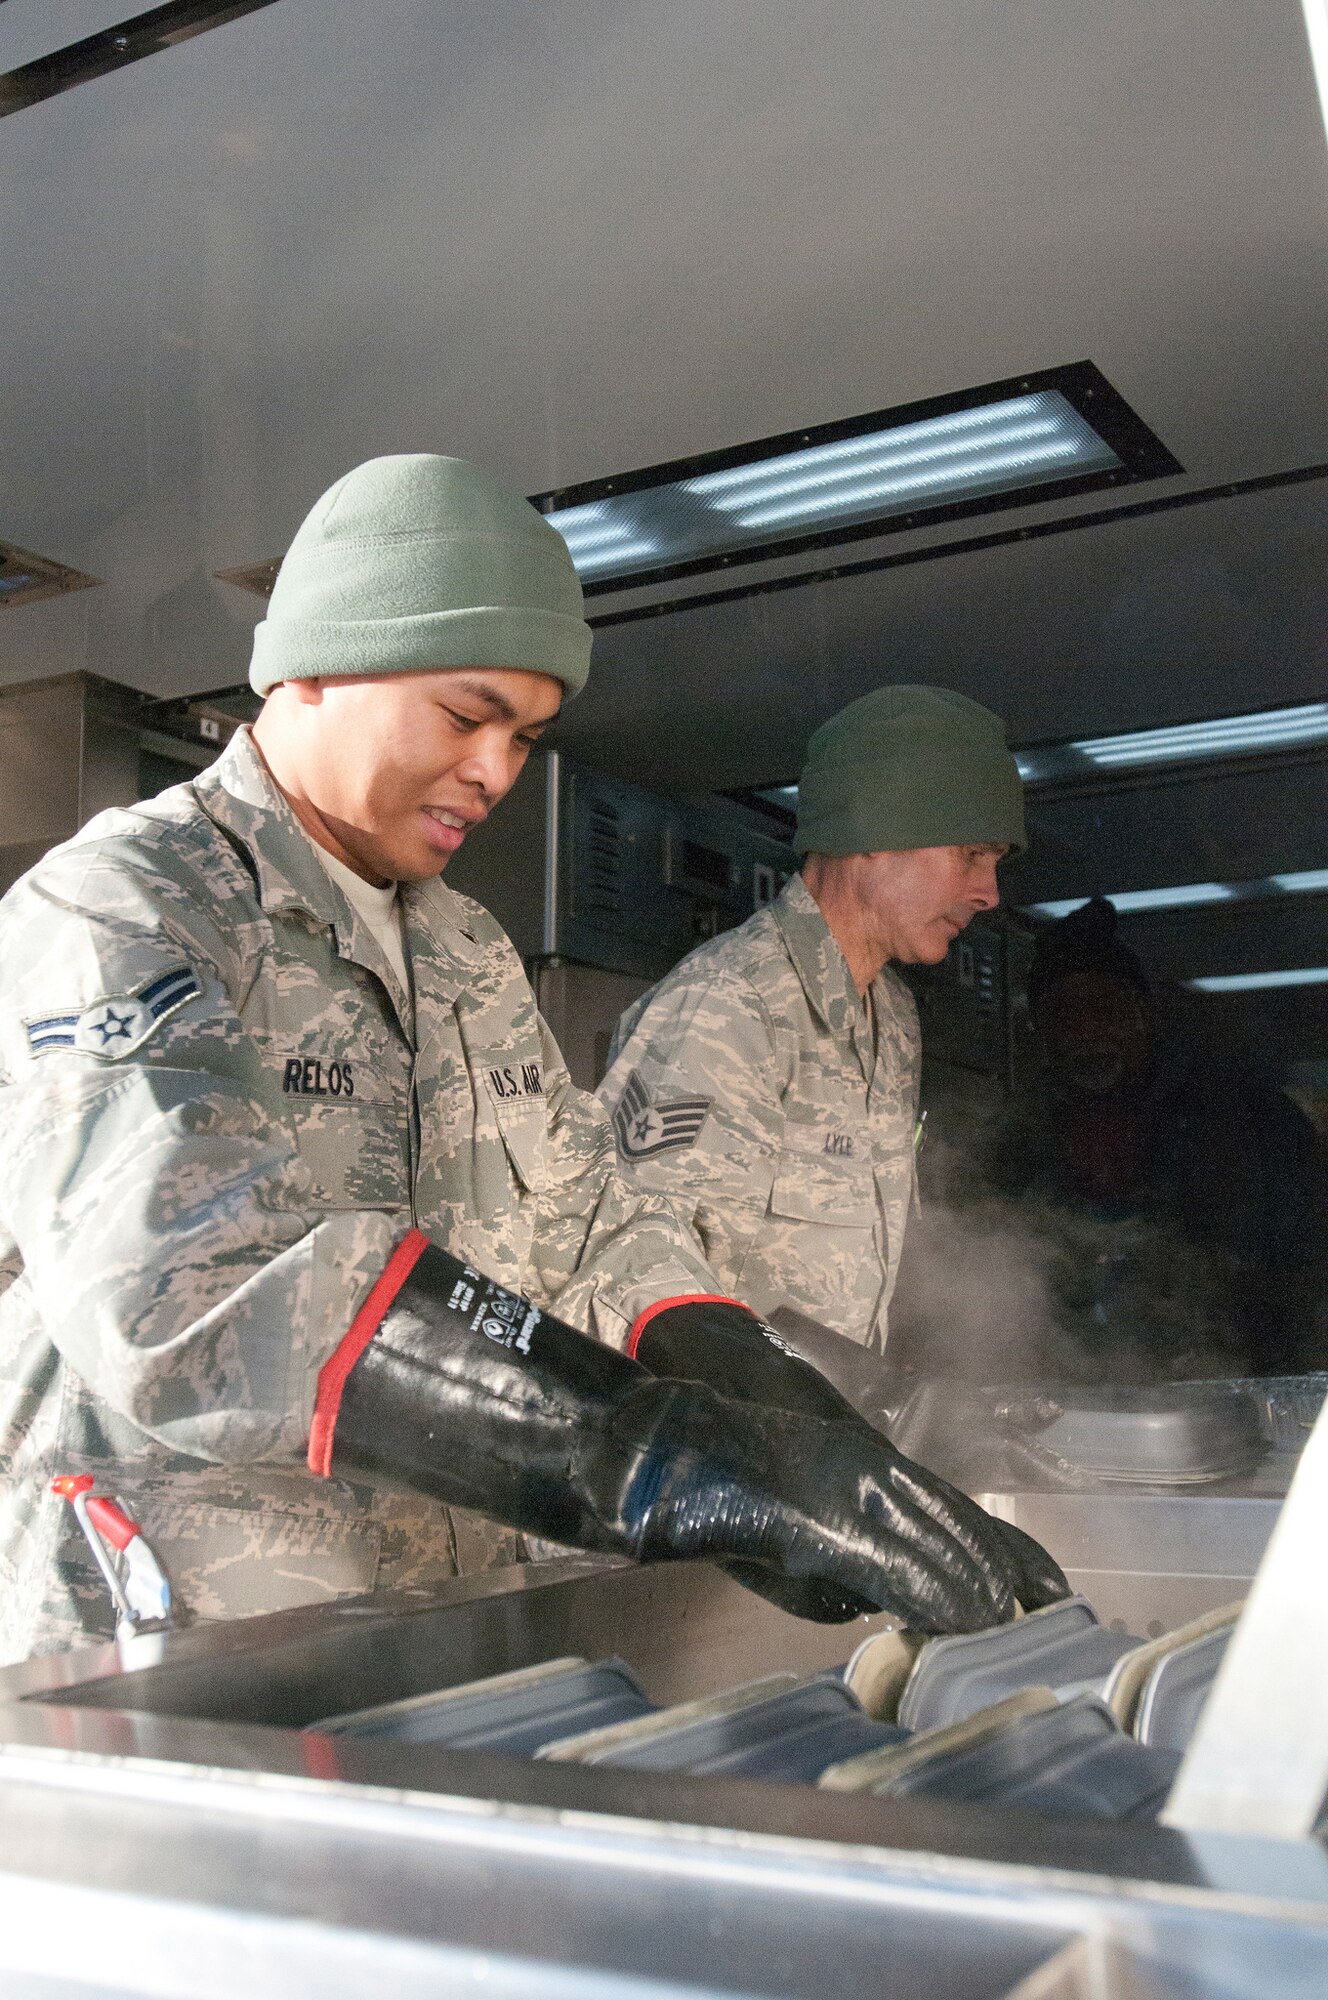 Members of the Kentucky Air National Guard’s 123rd Force Support Squadron cook meals for deployed Soldiers and Airmen at McKinley Technology High School in Washington, D.C., on Jan. 19, 2013. The Kentucky team served more than 1,800 meals from a Disaster Relief Mobile Kitchen Trailer. (Kentucky Air National Guard photo by Senior Airman Vicky Spesard)